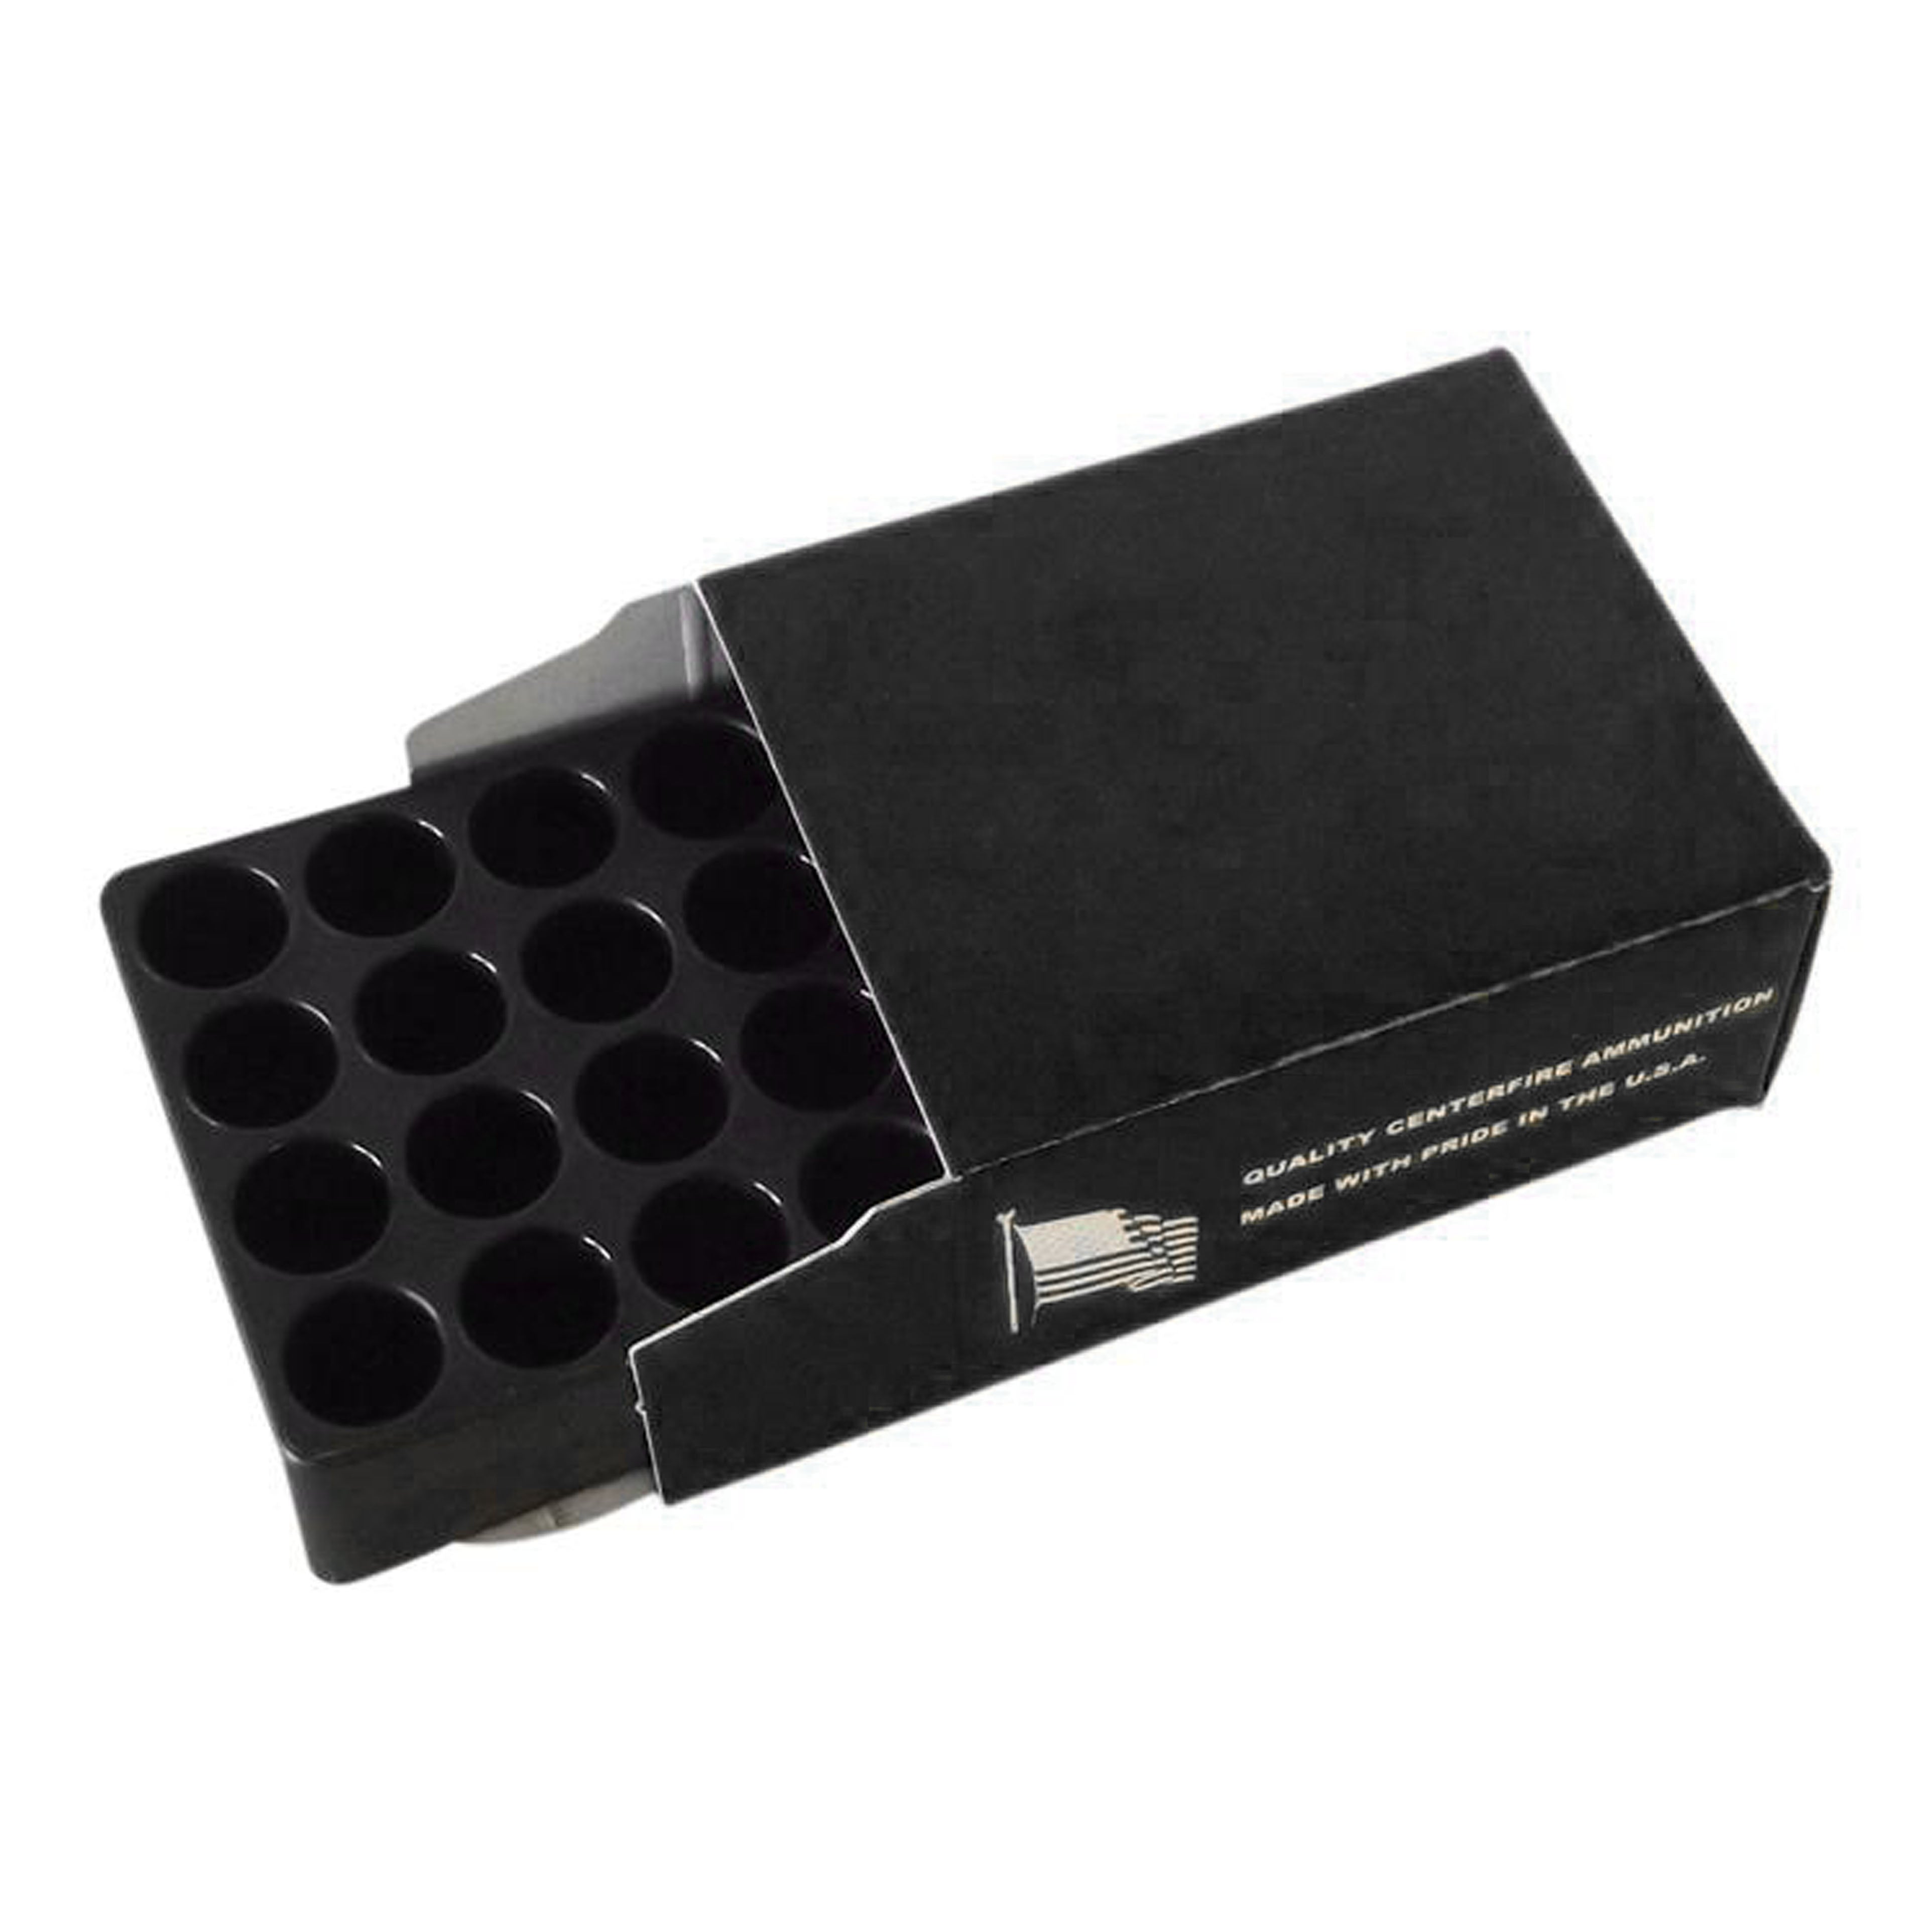 #18 Ammunition Packaging Box & Tray Combos for 45 ACP / .40 S&W  / 10mm - 20 Round Capacity